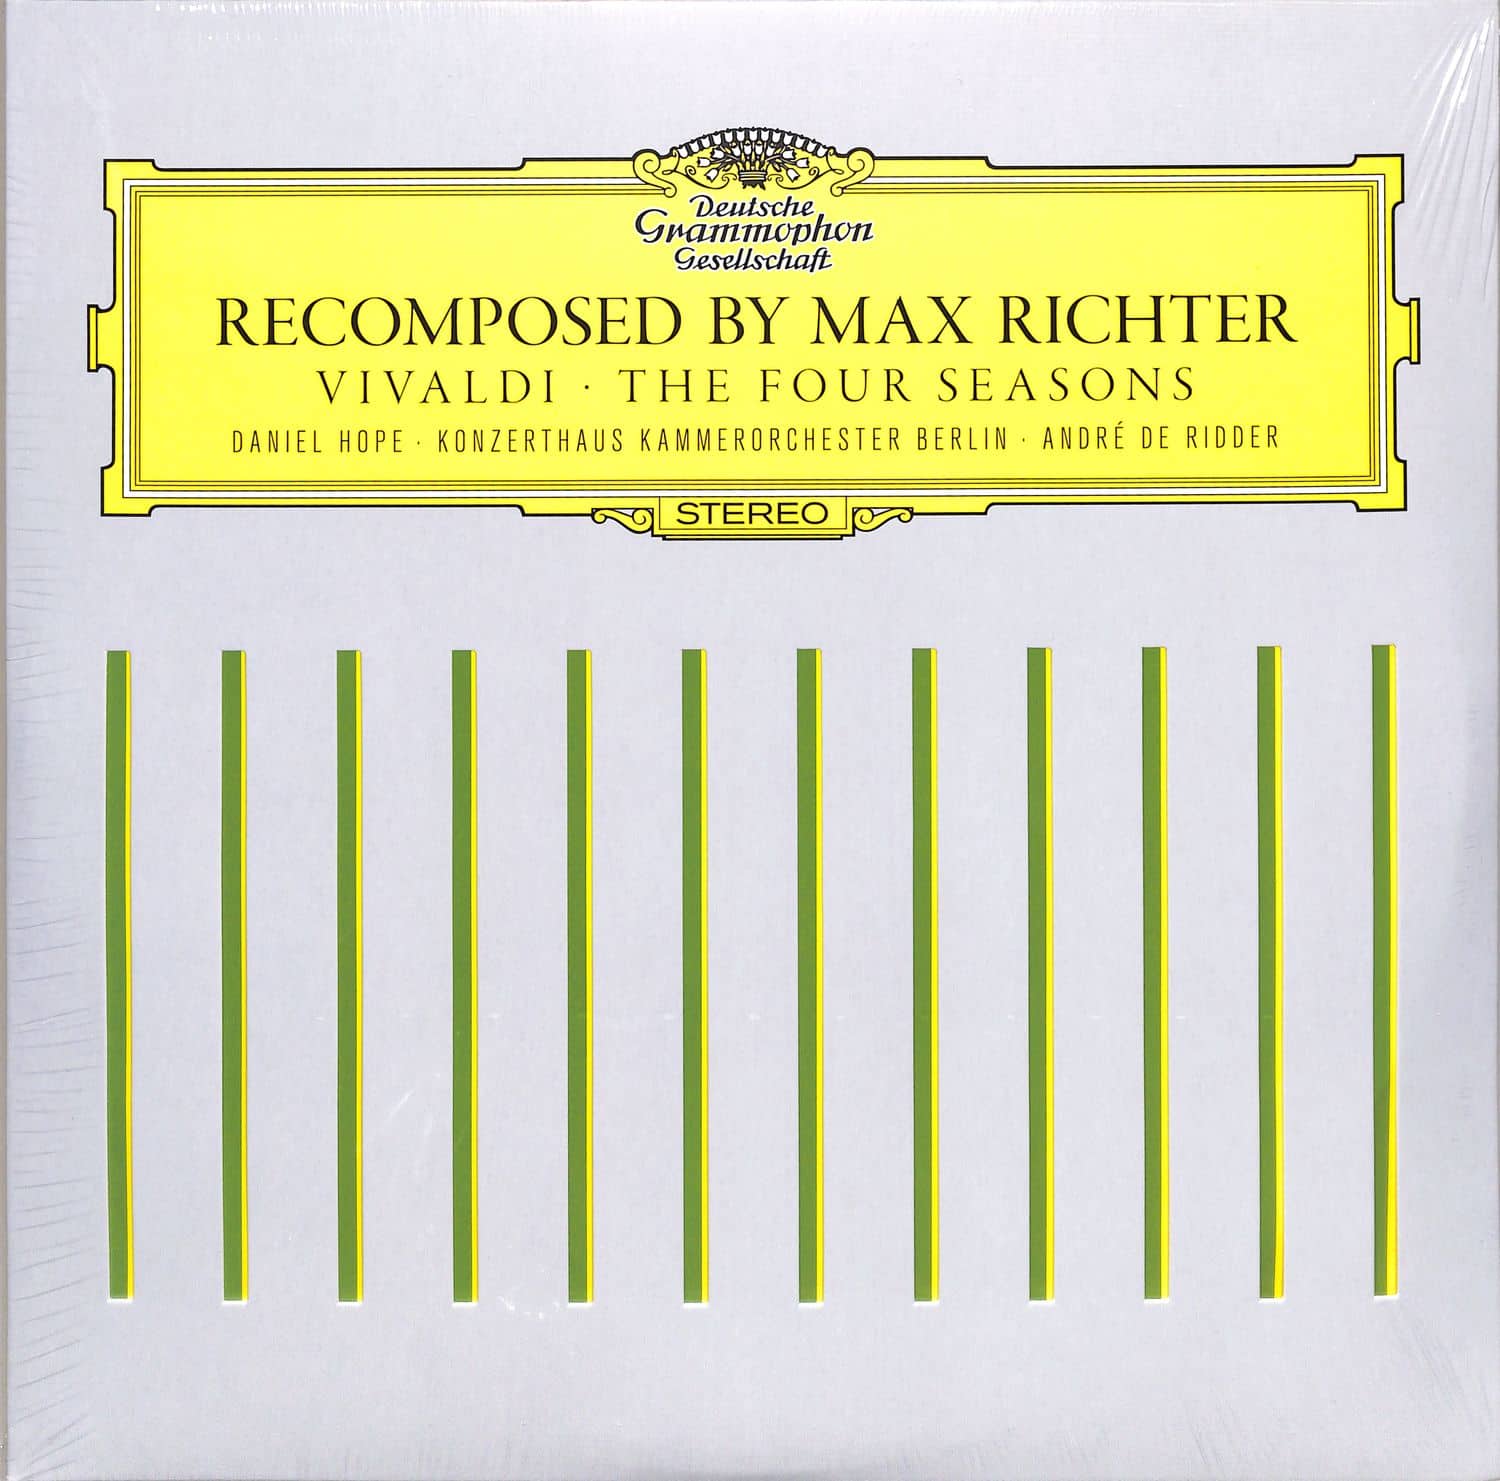 Vivaldi - RECOMPOSED BY MAX RICHTER - FOUR SEASONS 